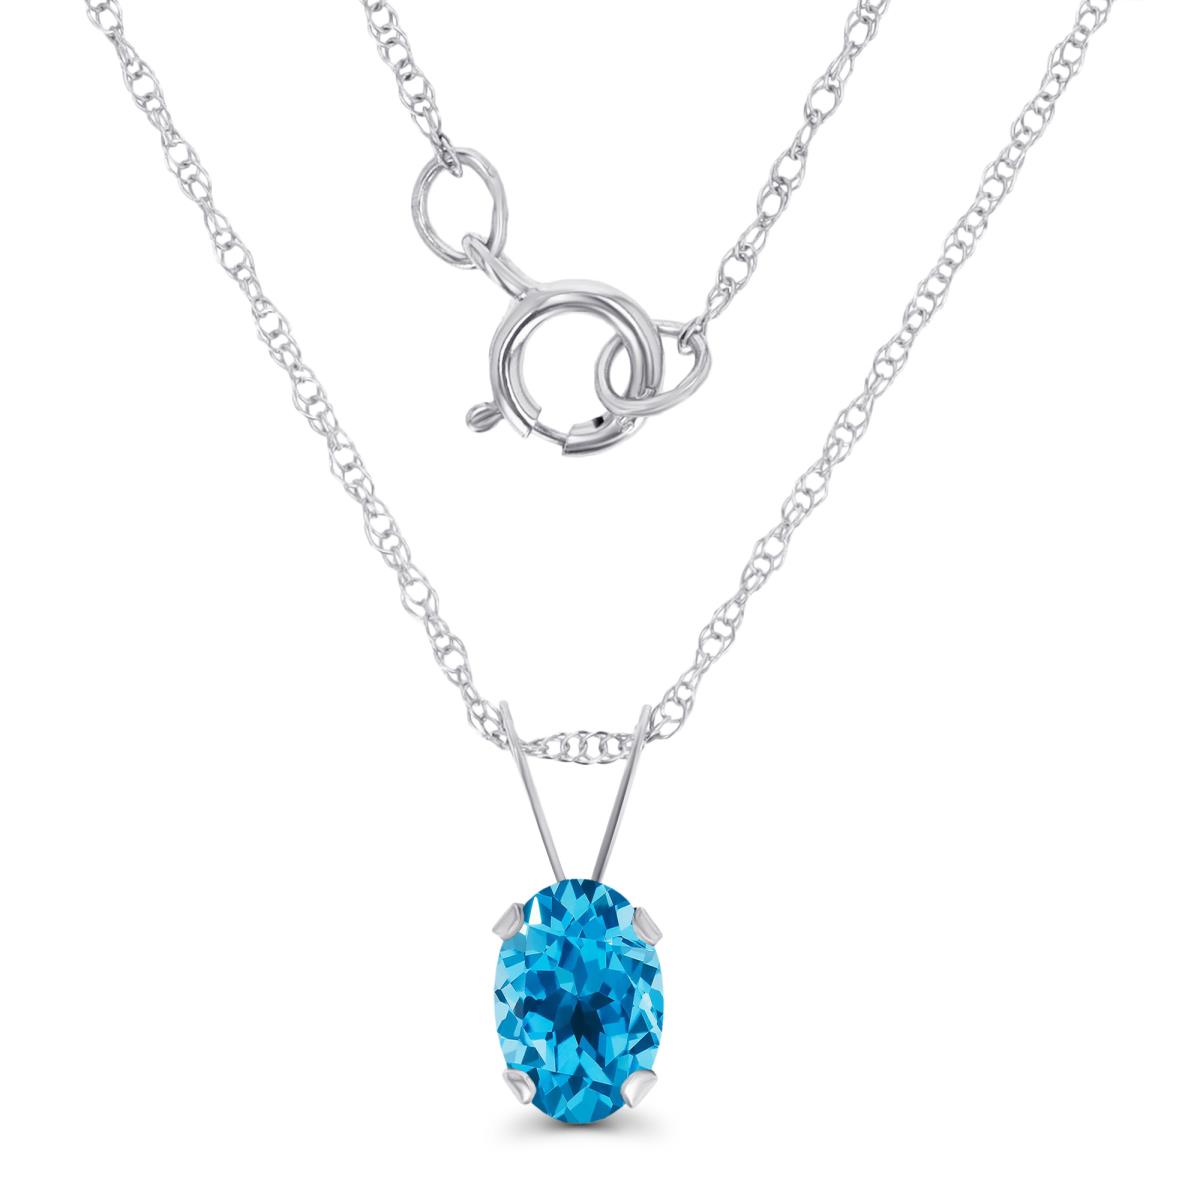 14K White Gold 6x4mm Oval Swiss Blue Topaz 18" Rope Chain Necklace